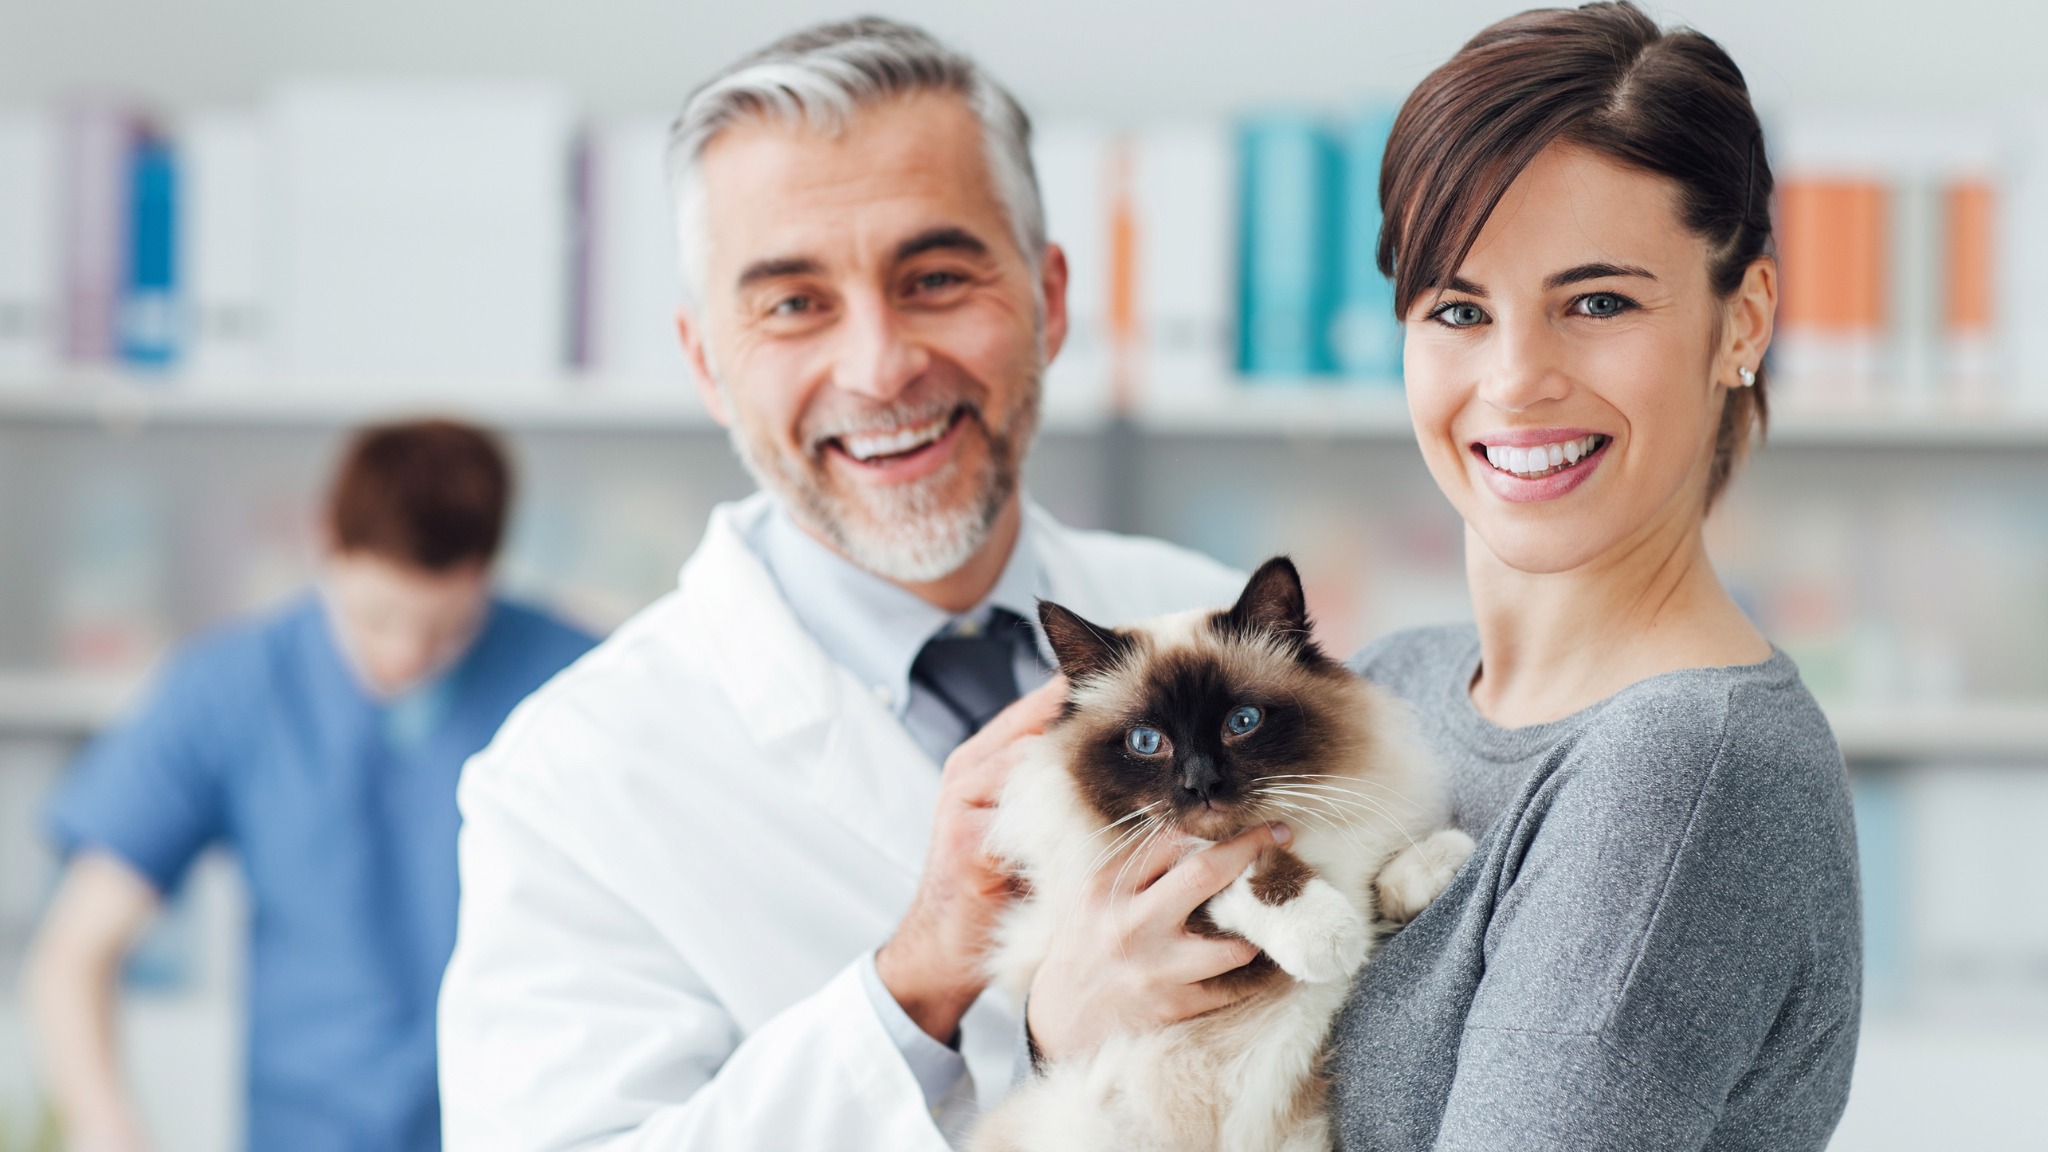 Interpersonal communication of veterinary doctor - the science based approach 